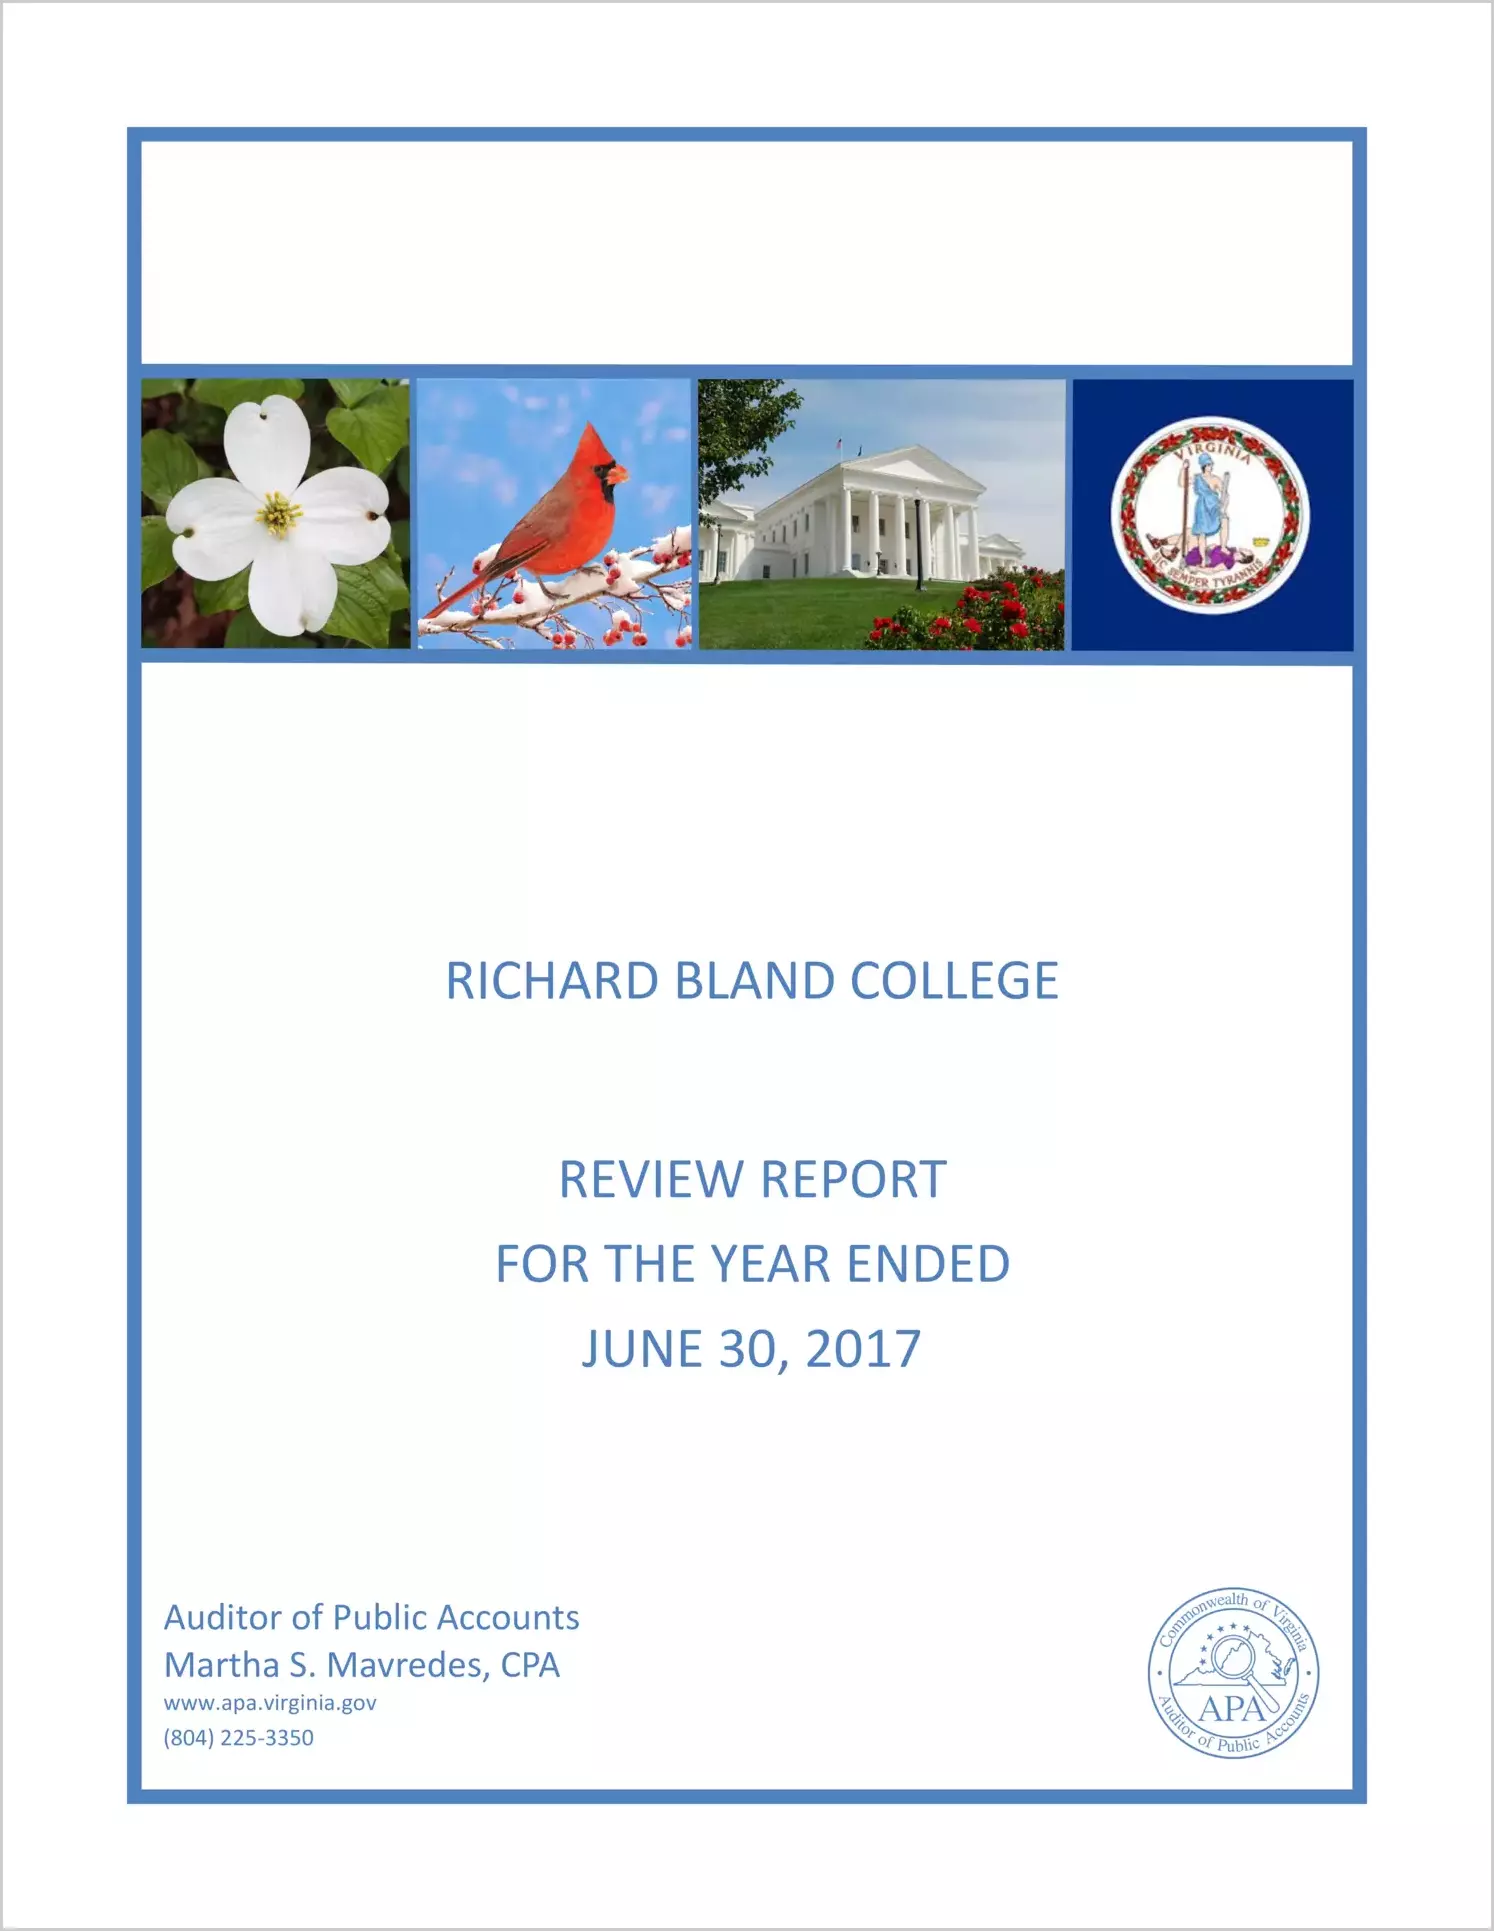 Richard Bland College Review for the year ended June 30, 2017